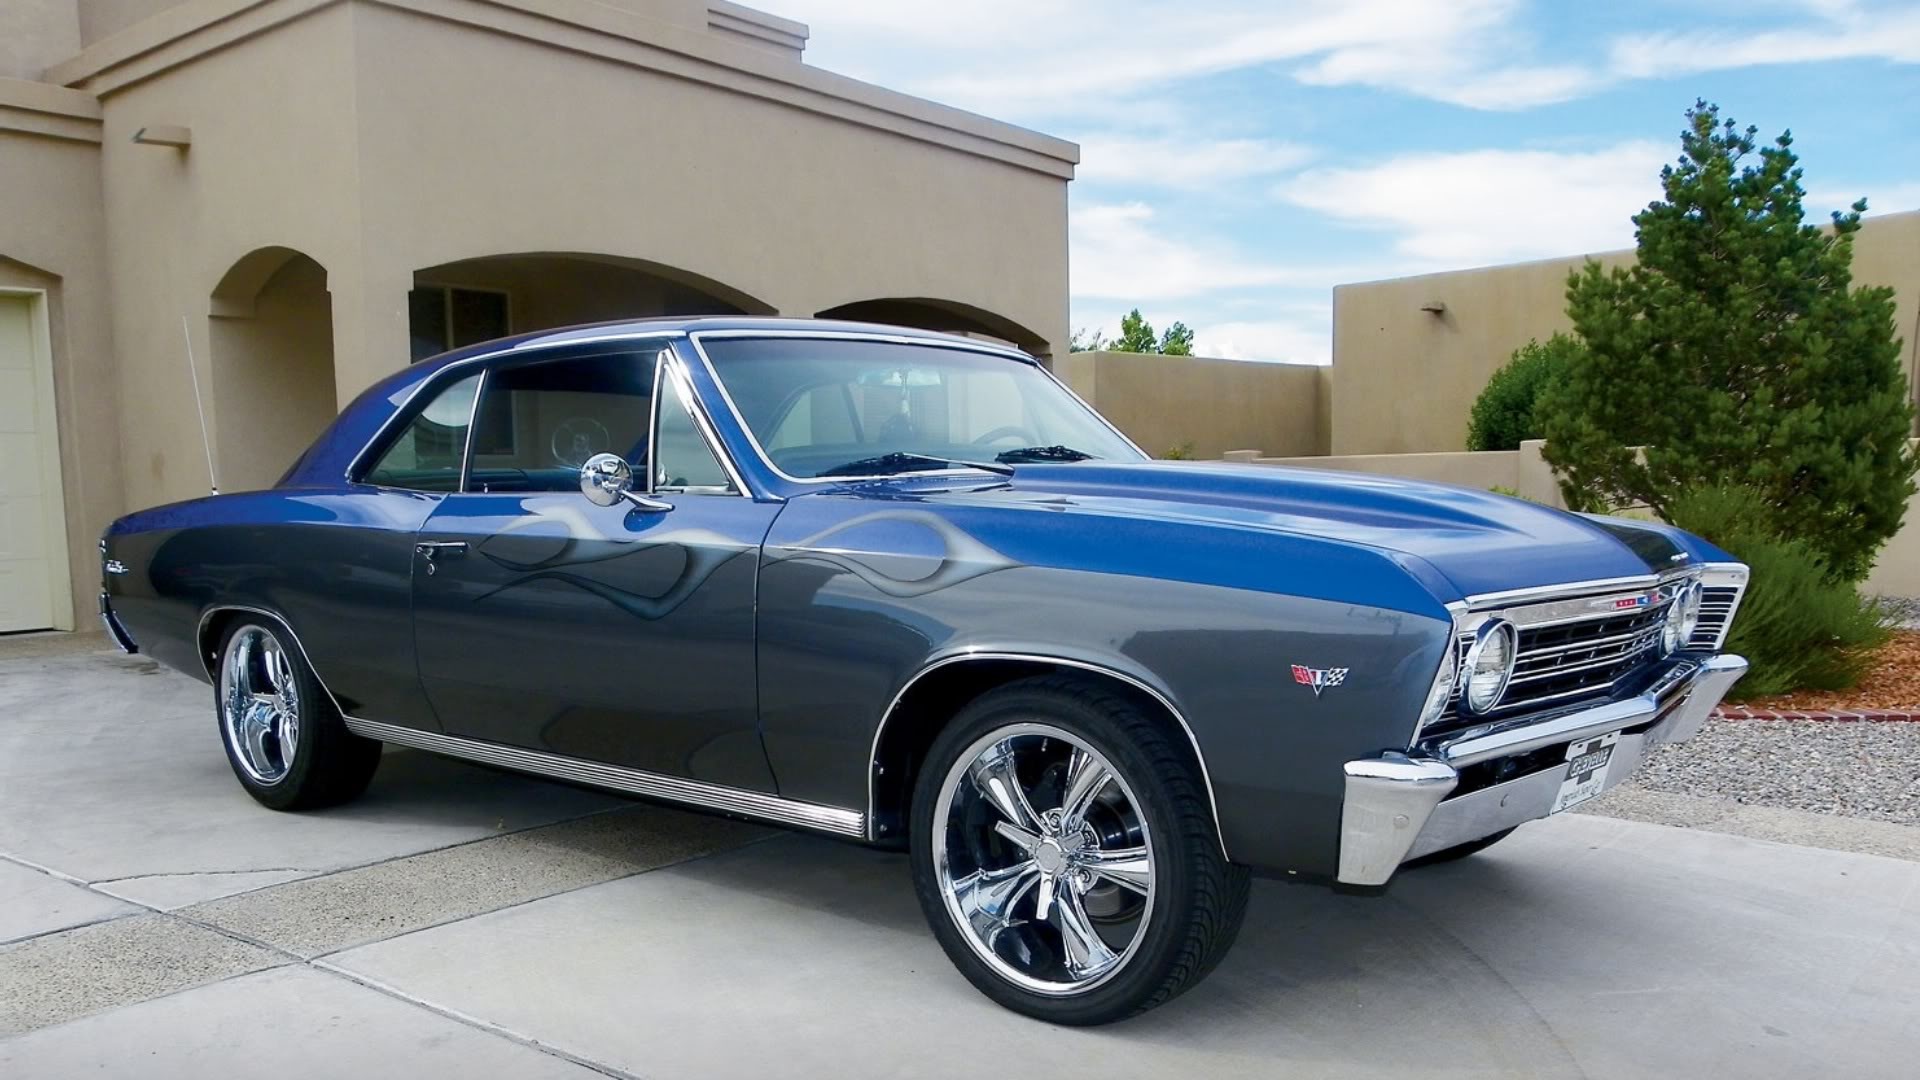 1967 Chevrolet Chevelle, Blue flames, Muscle styling, Performance vehicle, Collector's choice, 1920x1080 Full HD Desktop